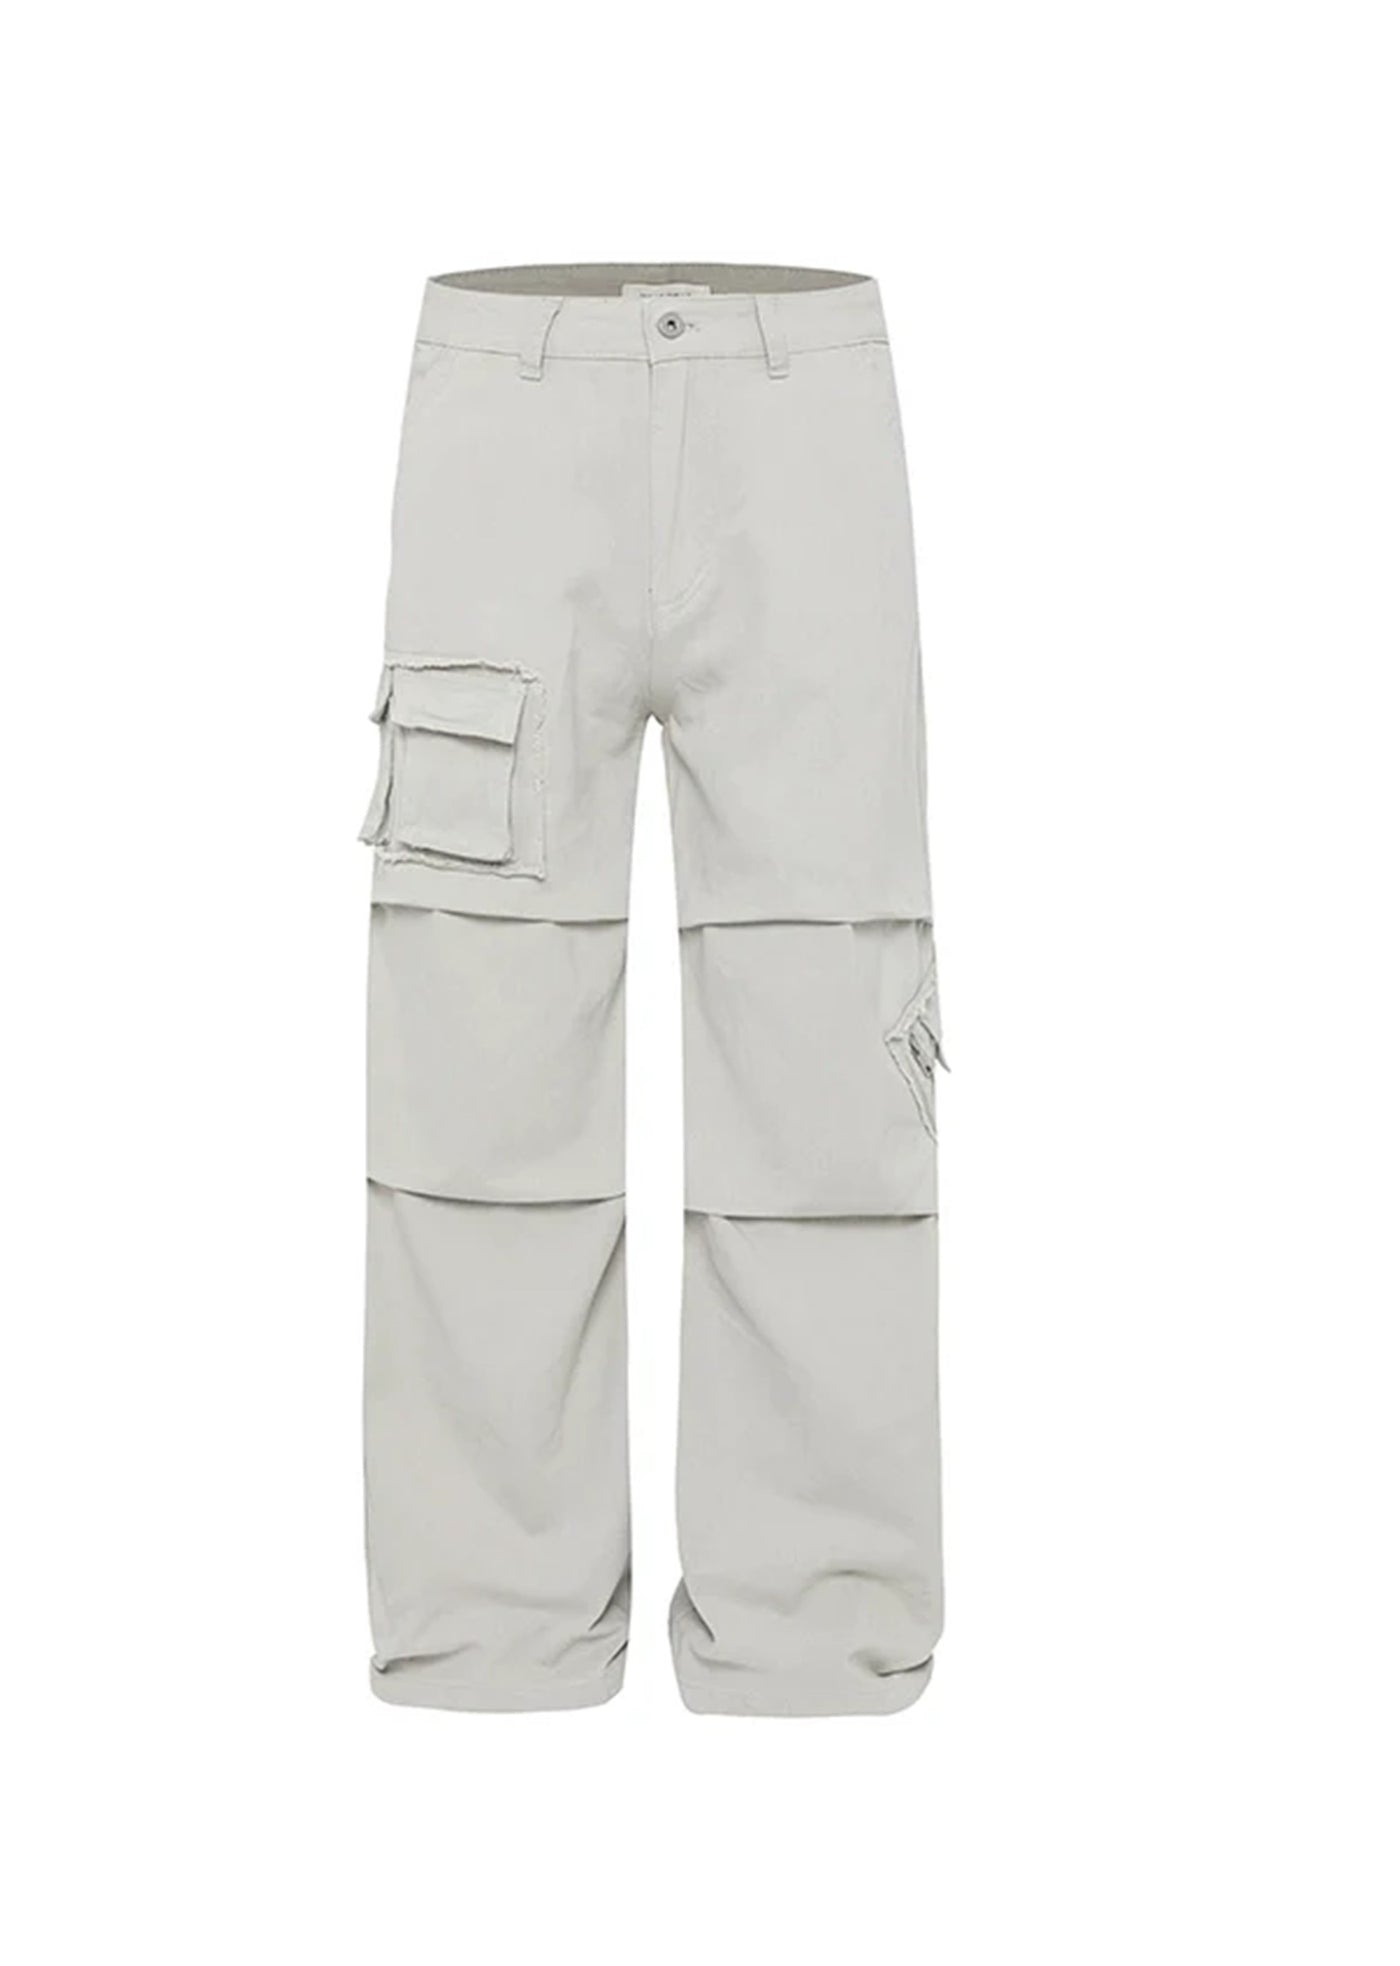 【MR nearly】One-point pocket design cargo pants  MR0108